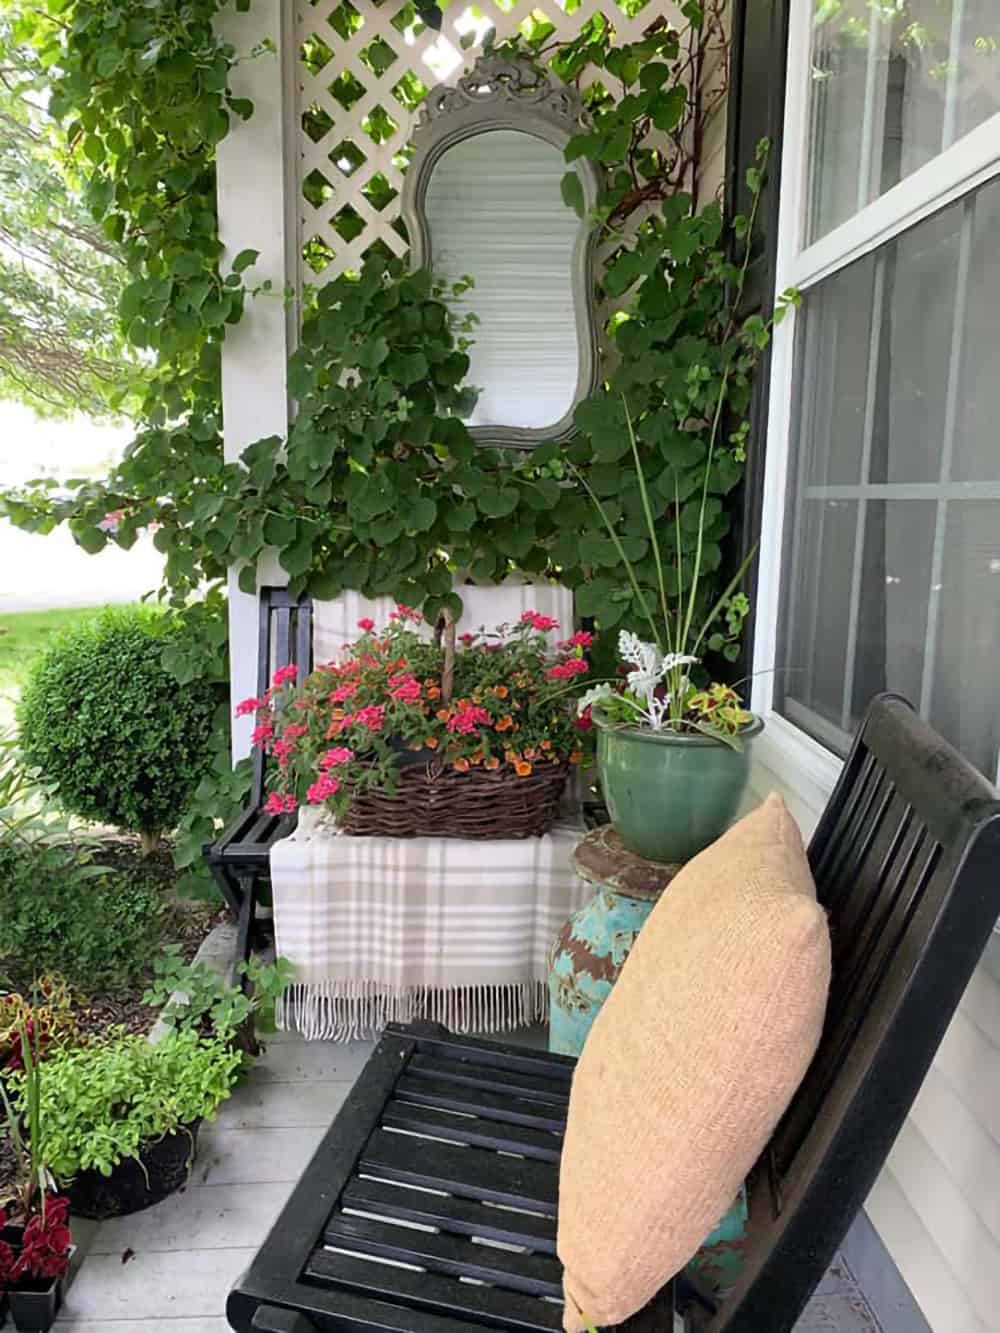 Summer decorated porch with hanging divider, bench, and decorations.